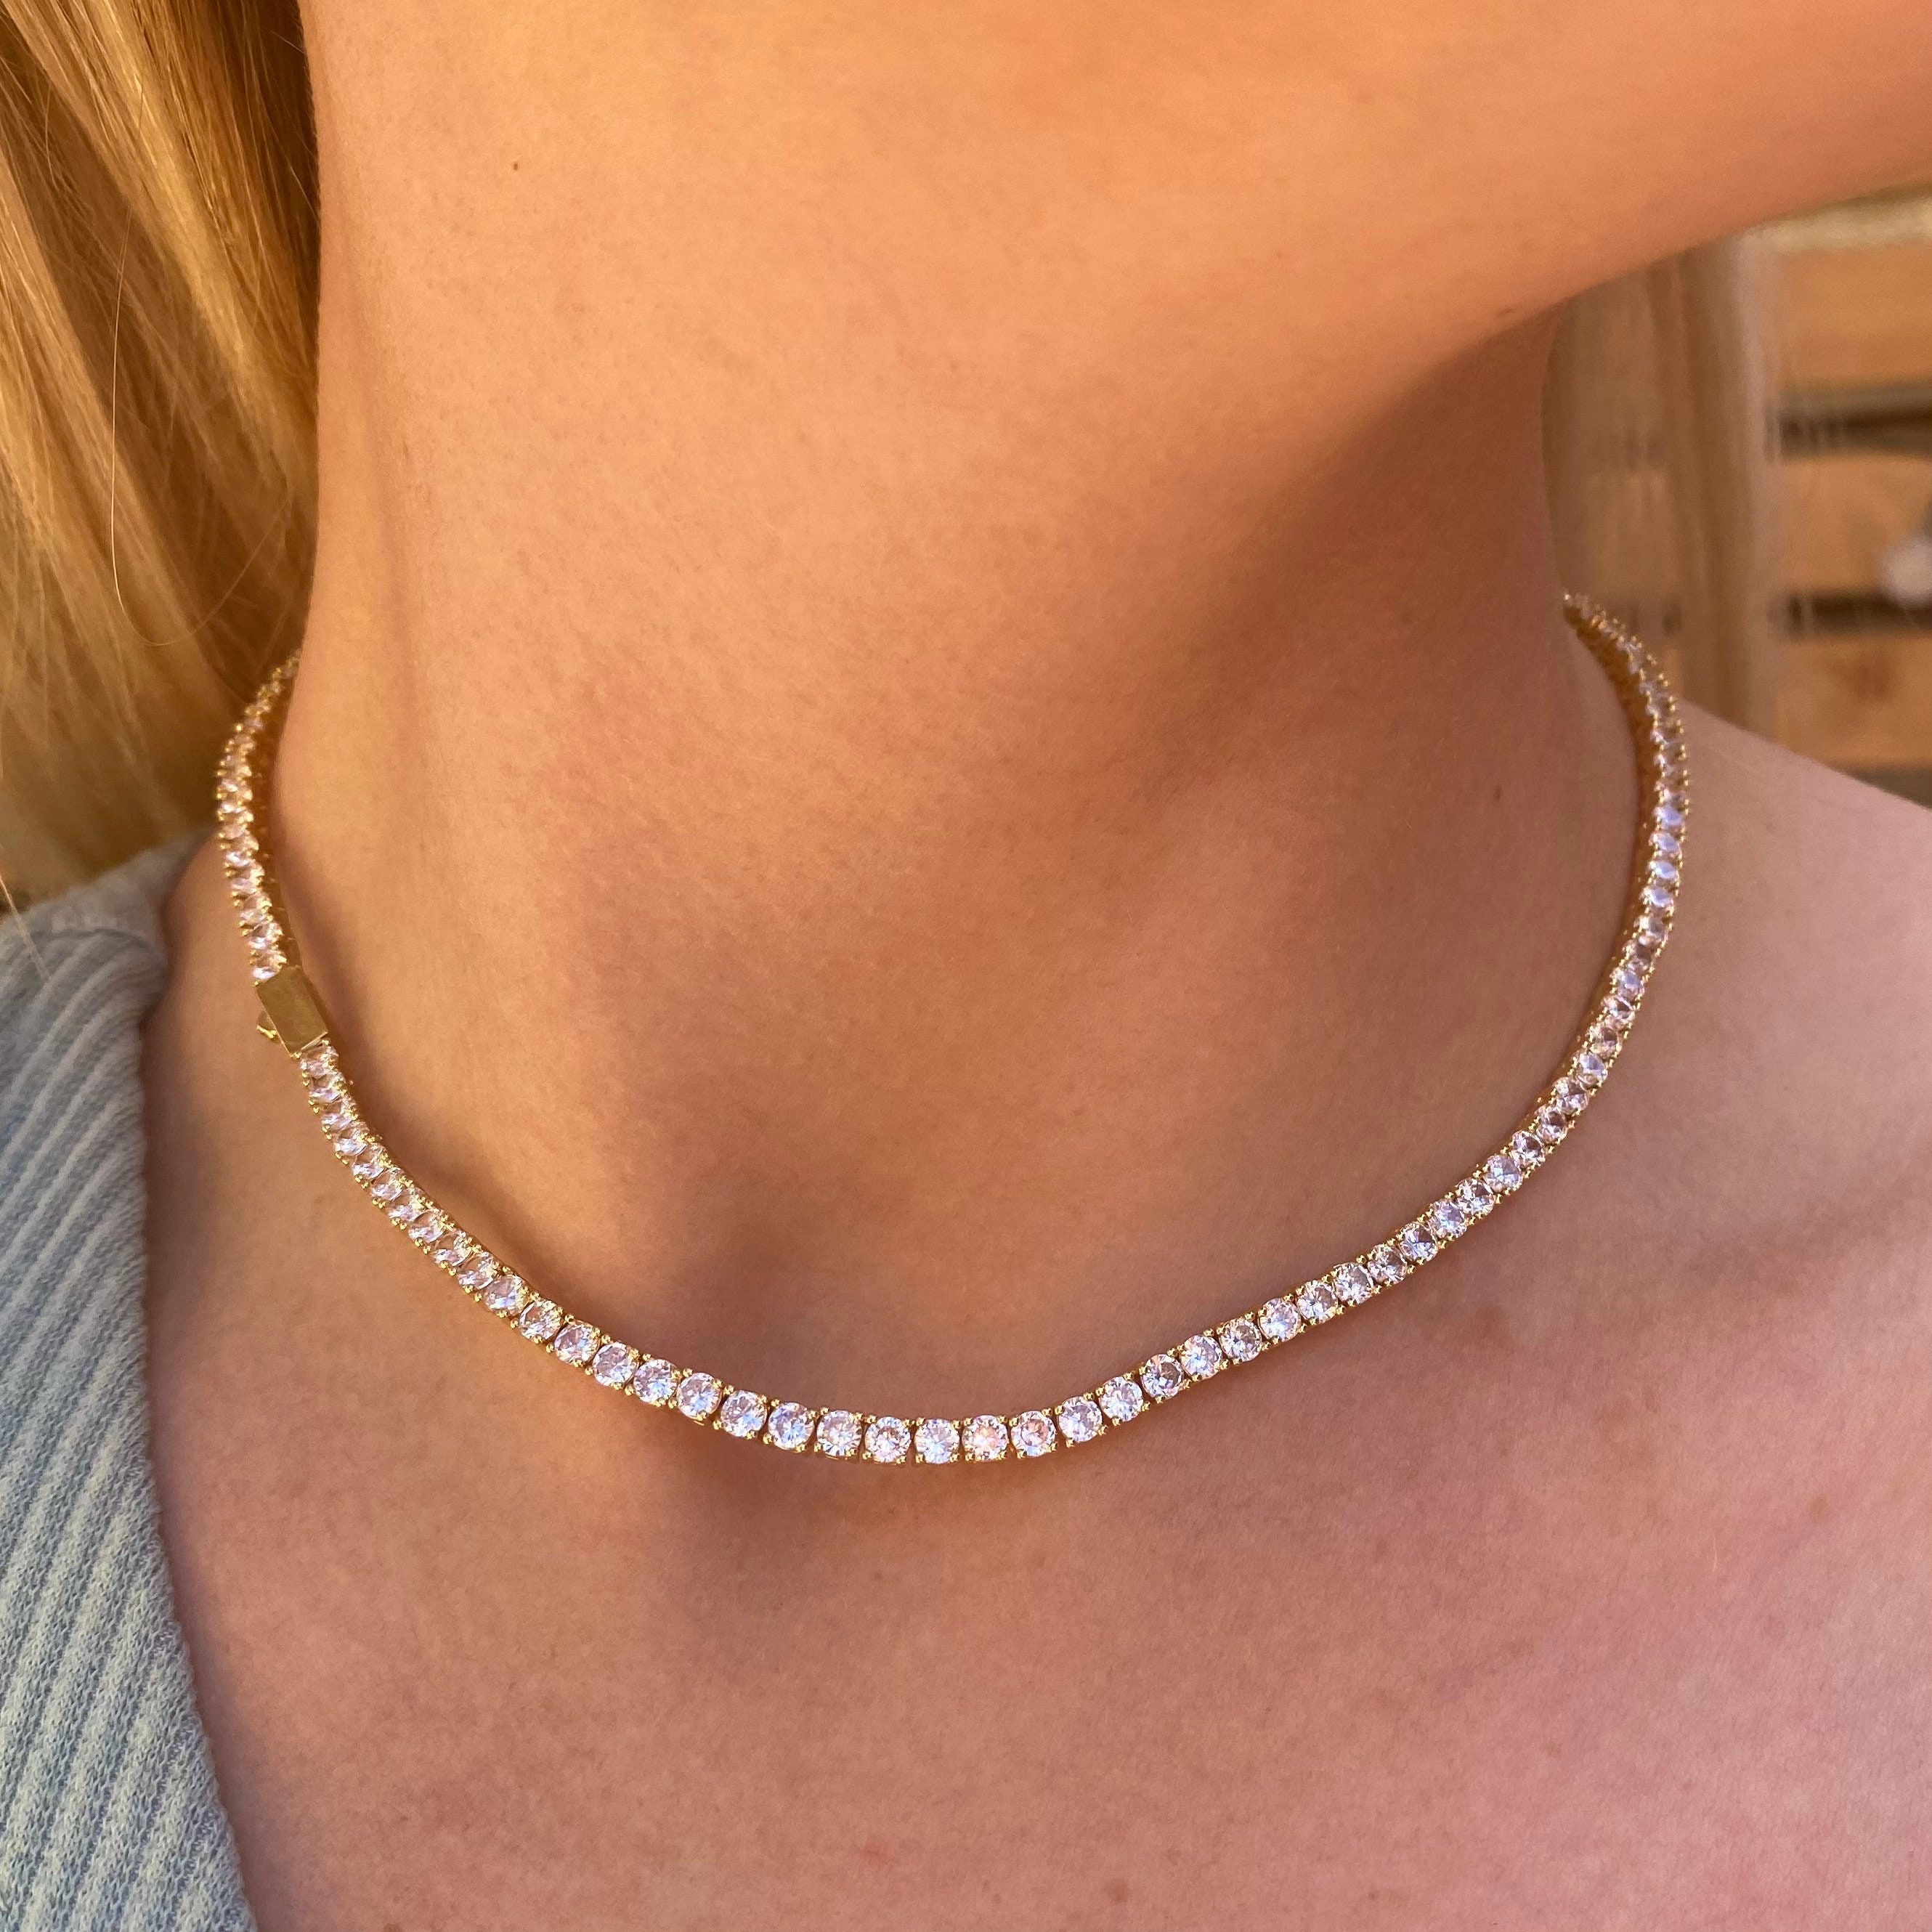 Diamond Essential Tennis Necklace Adjustable 41-46cm/16-18' in 18k Gold  Vermeil on Sterling Silver and Diamond | Jewellery by Monica Vinader